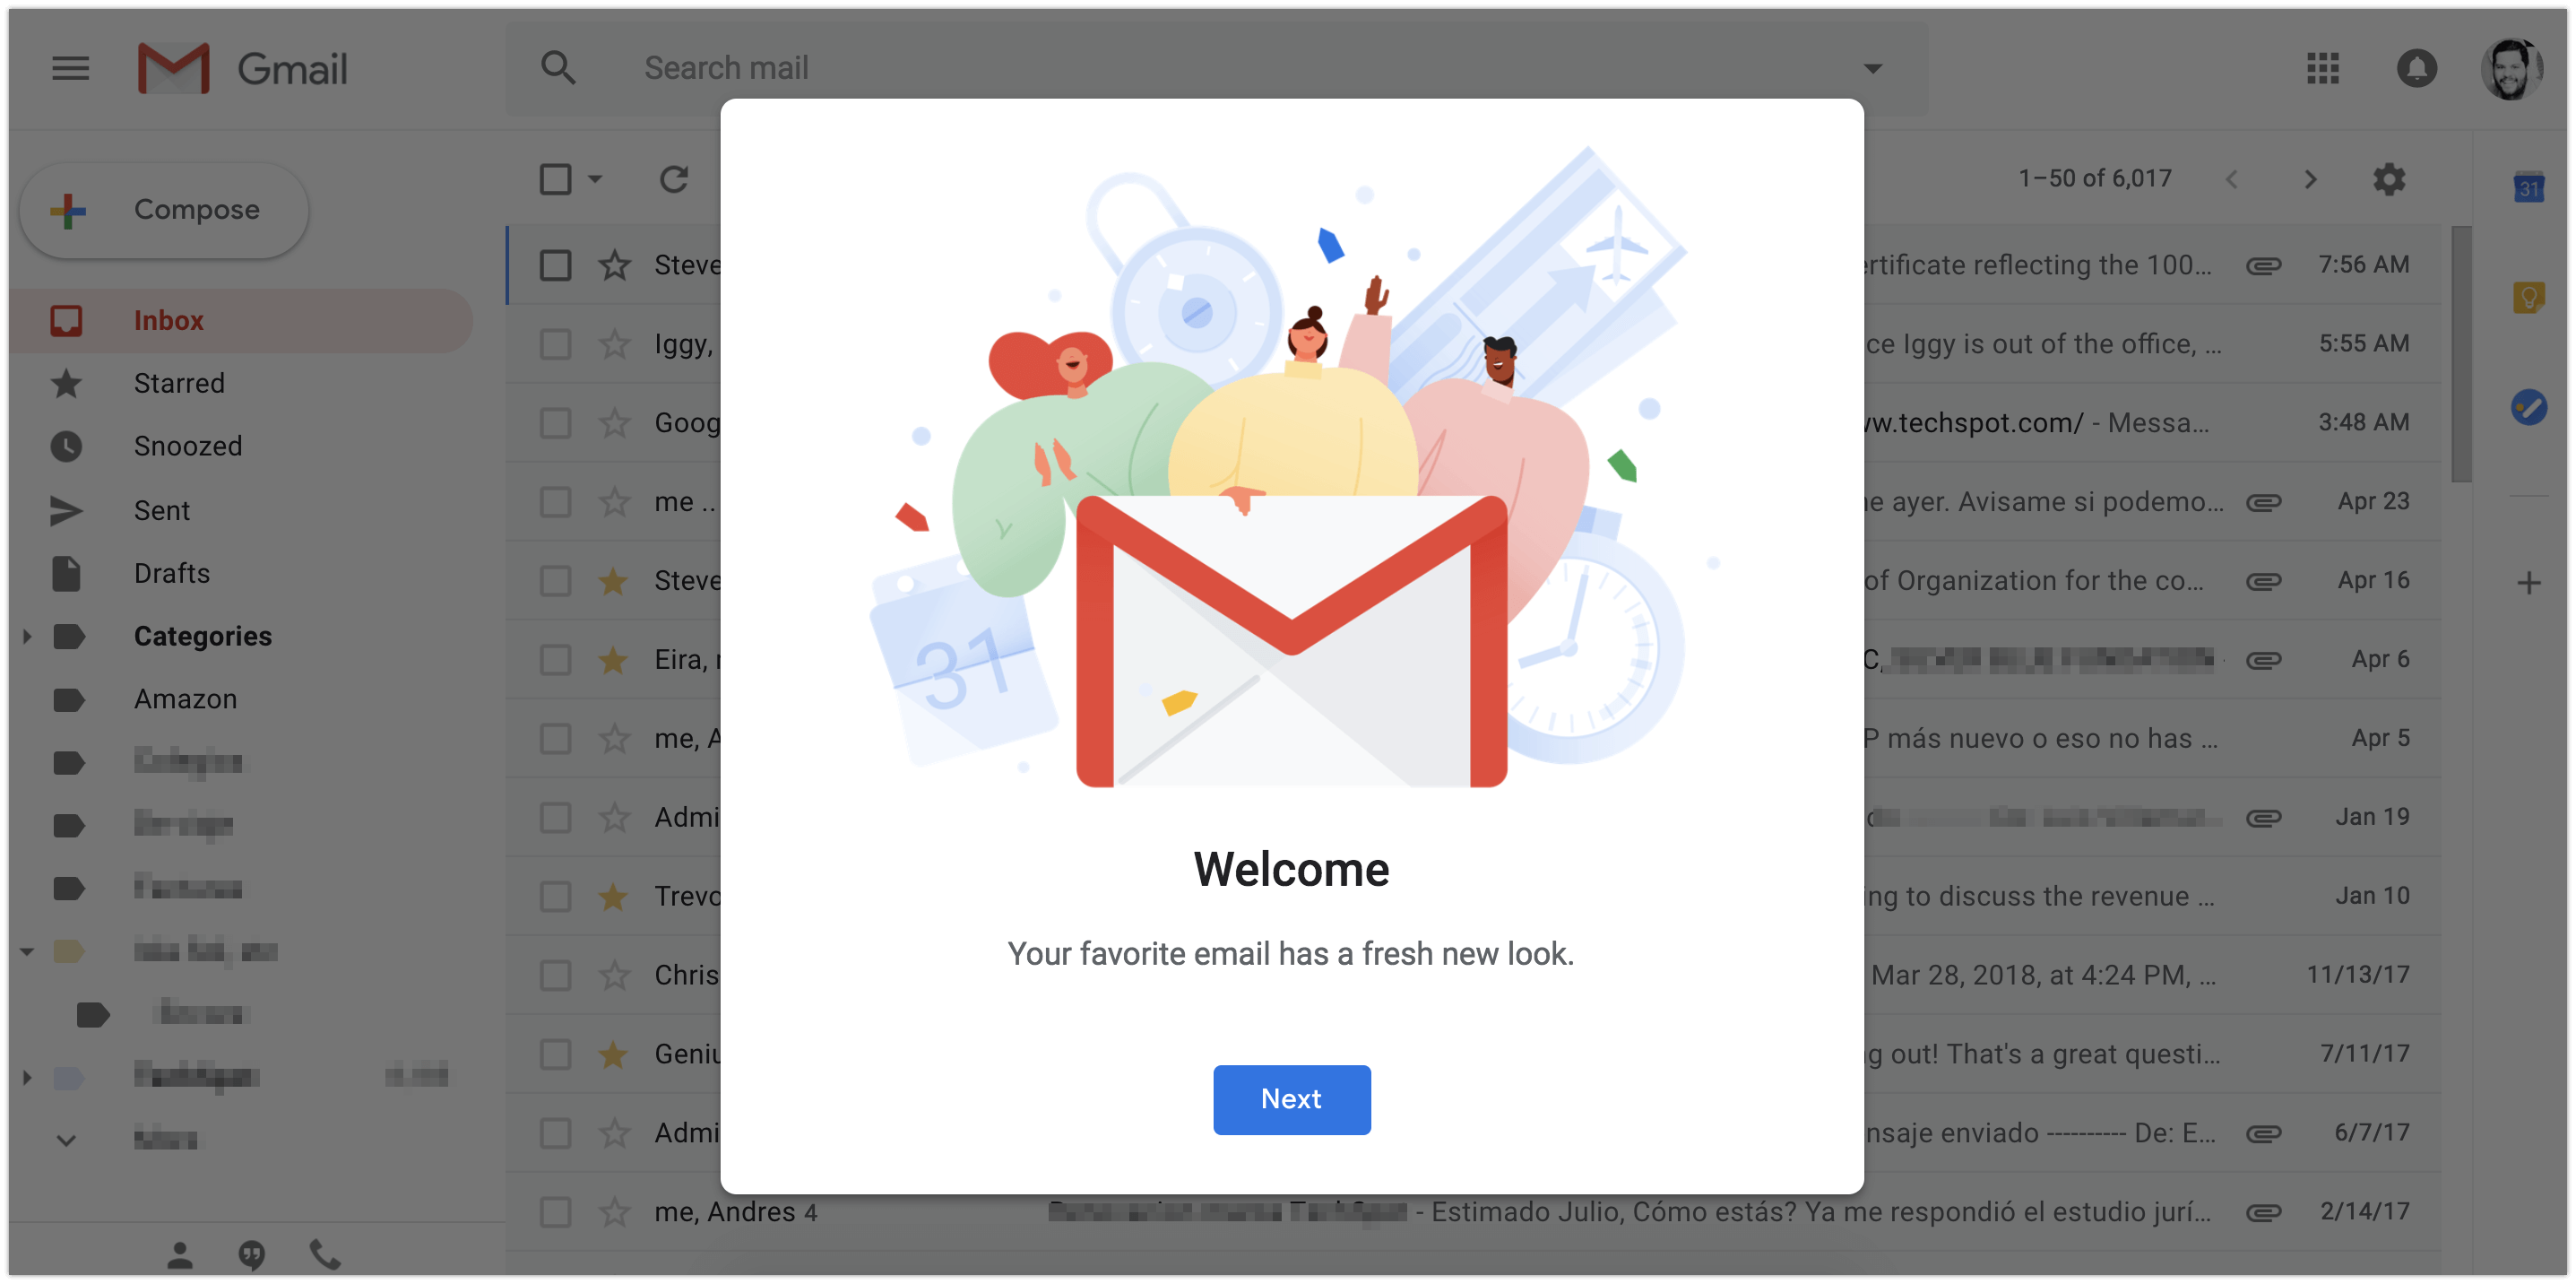 Google's Gmail update has arrived: self-destructing messages, snooze, and much more